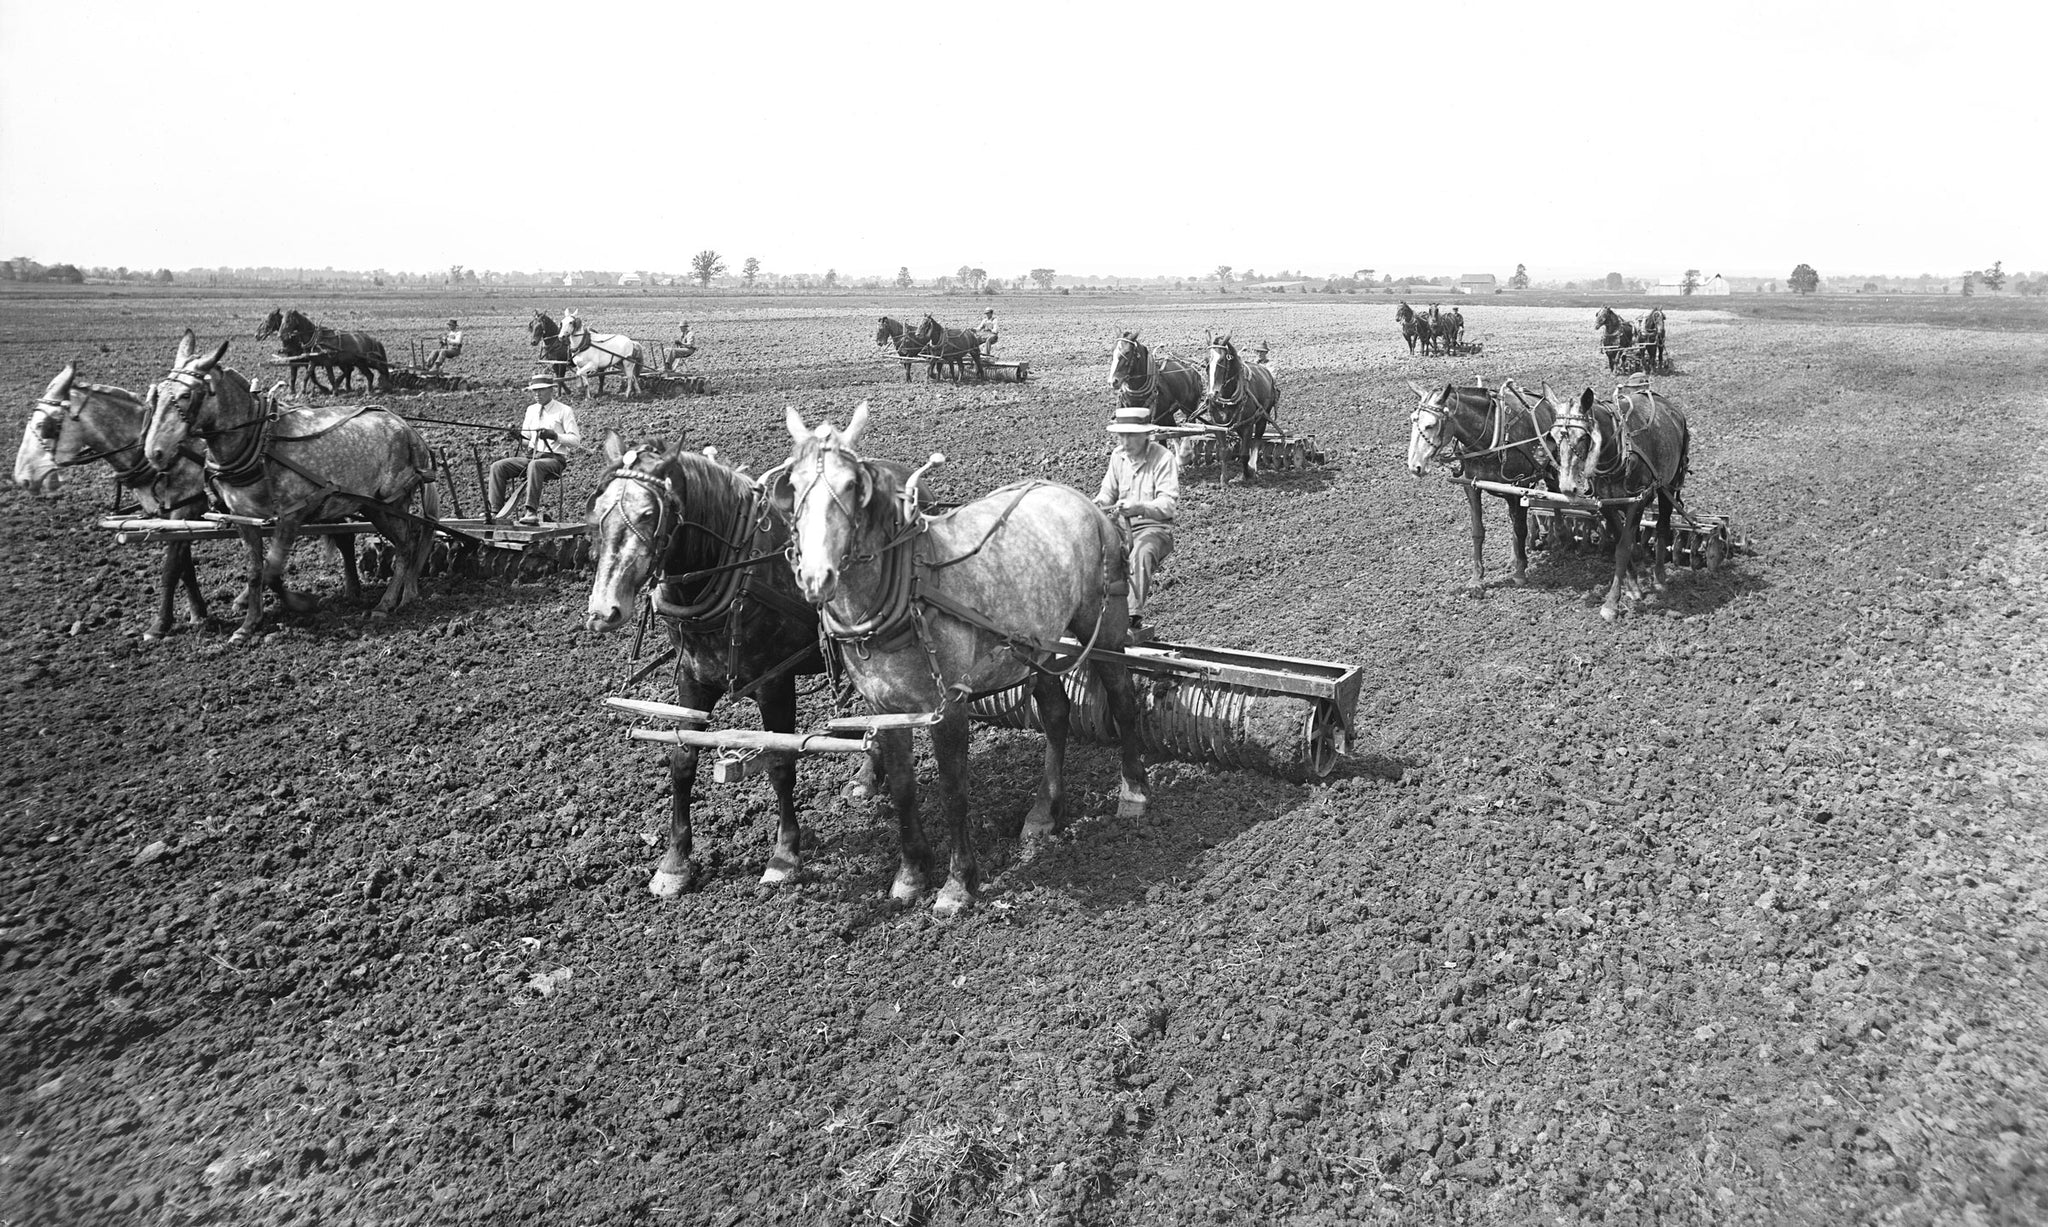 Teams working the fields at Heart’s Delight Farm, circa 1915. -- Courtesy Miner Institute